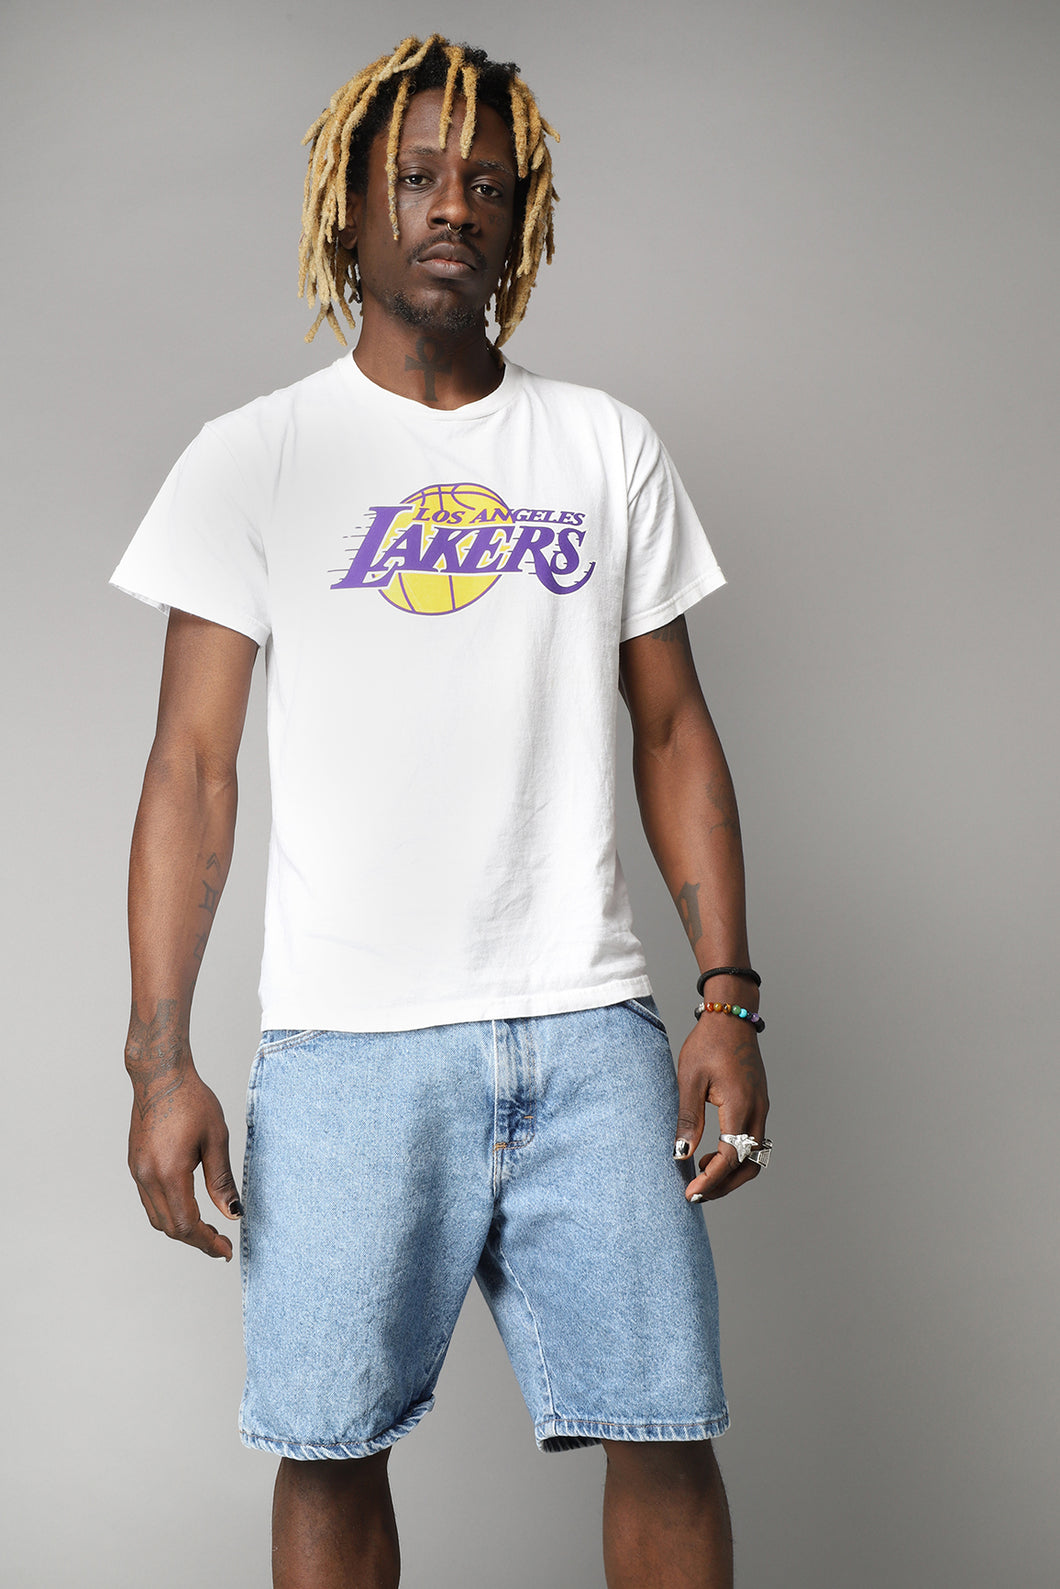 Los Angeles Lakers Basketball White T-shirt